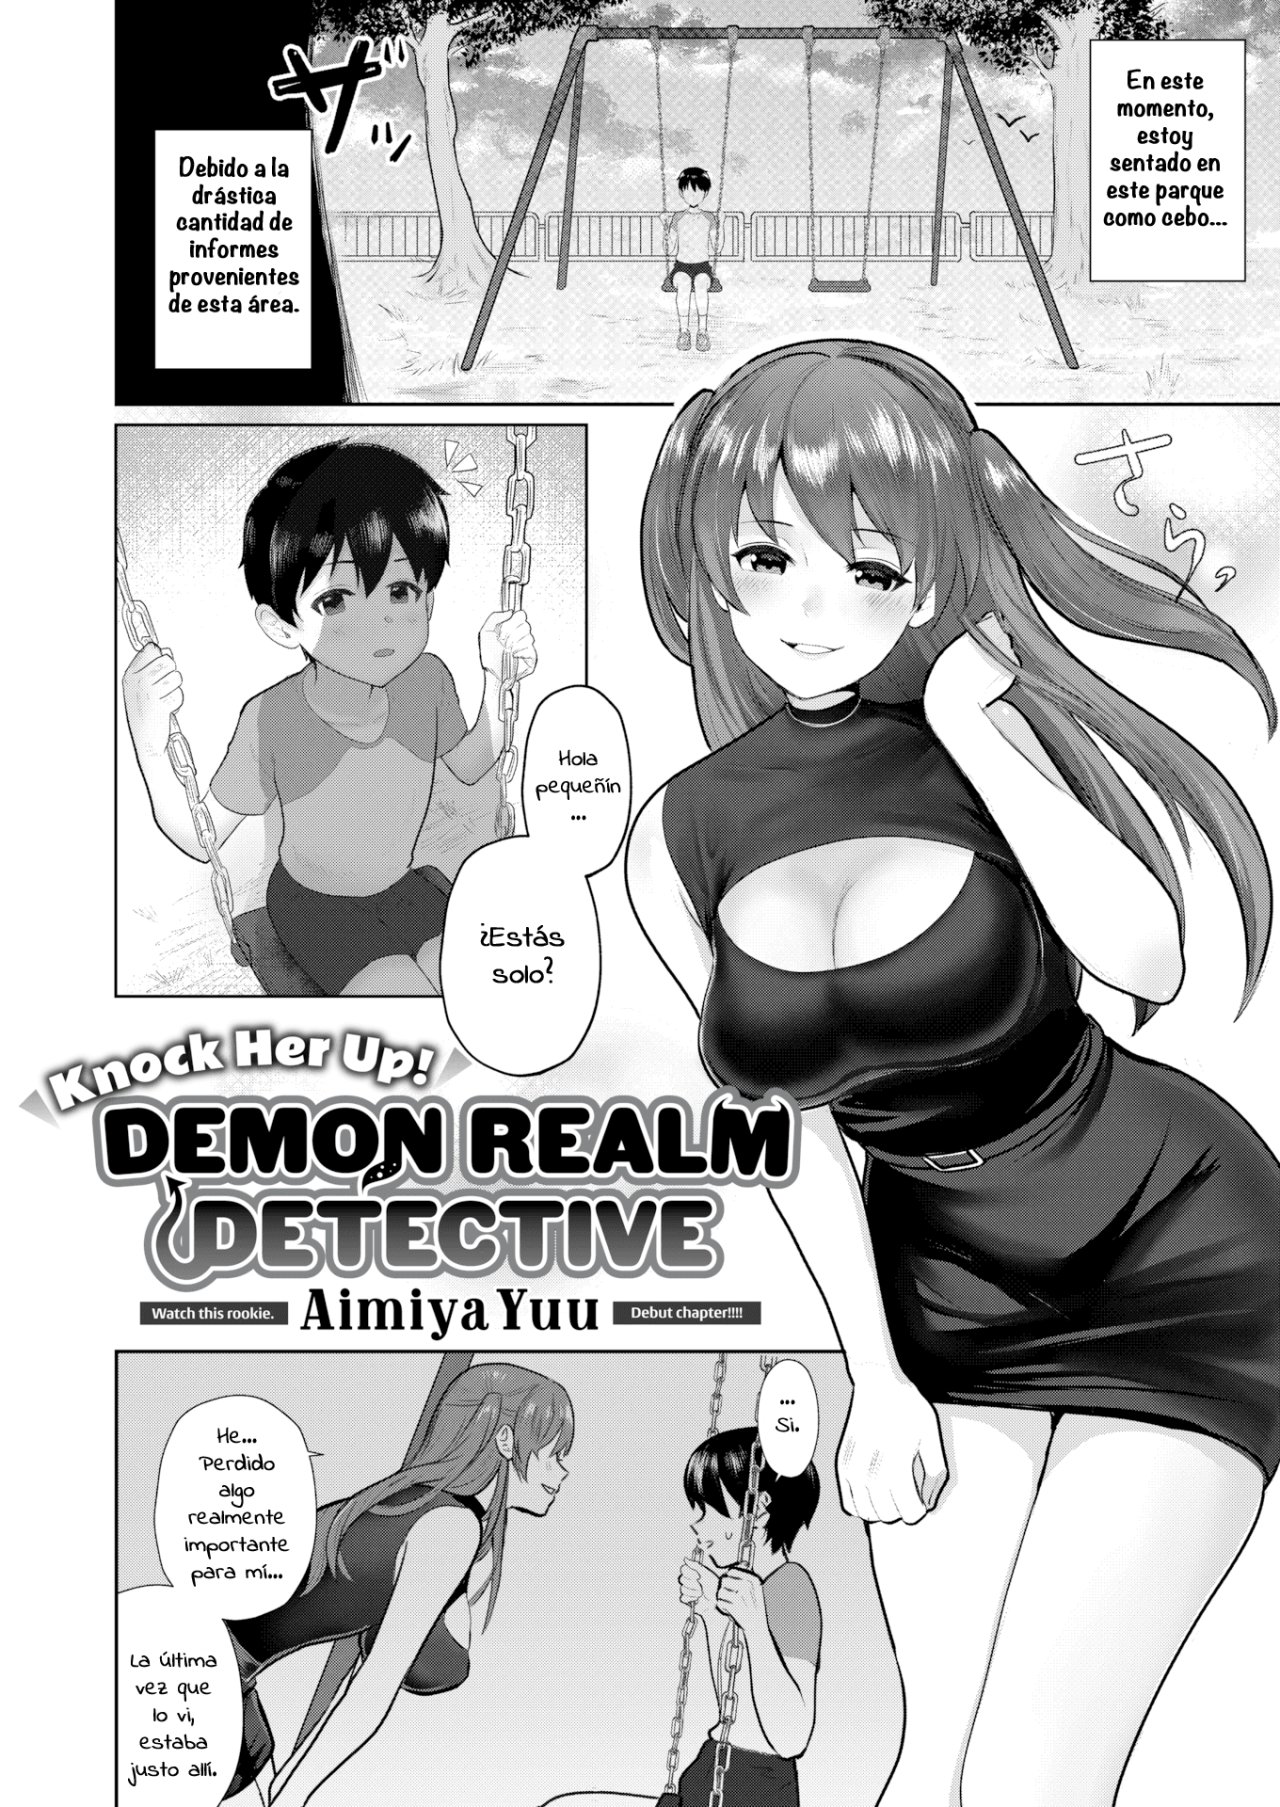 Knock Her Up! Demon Realm Detective - 1